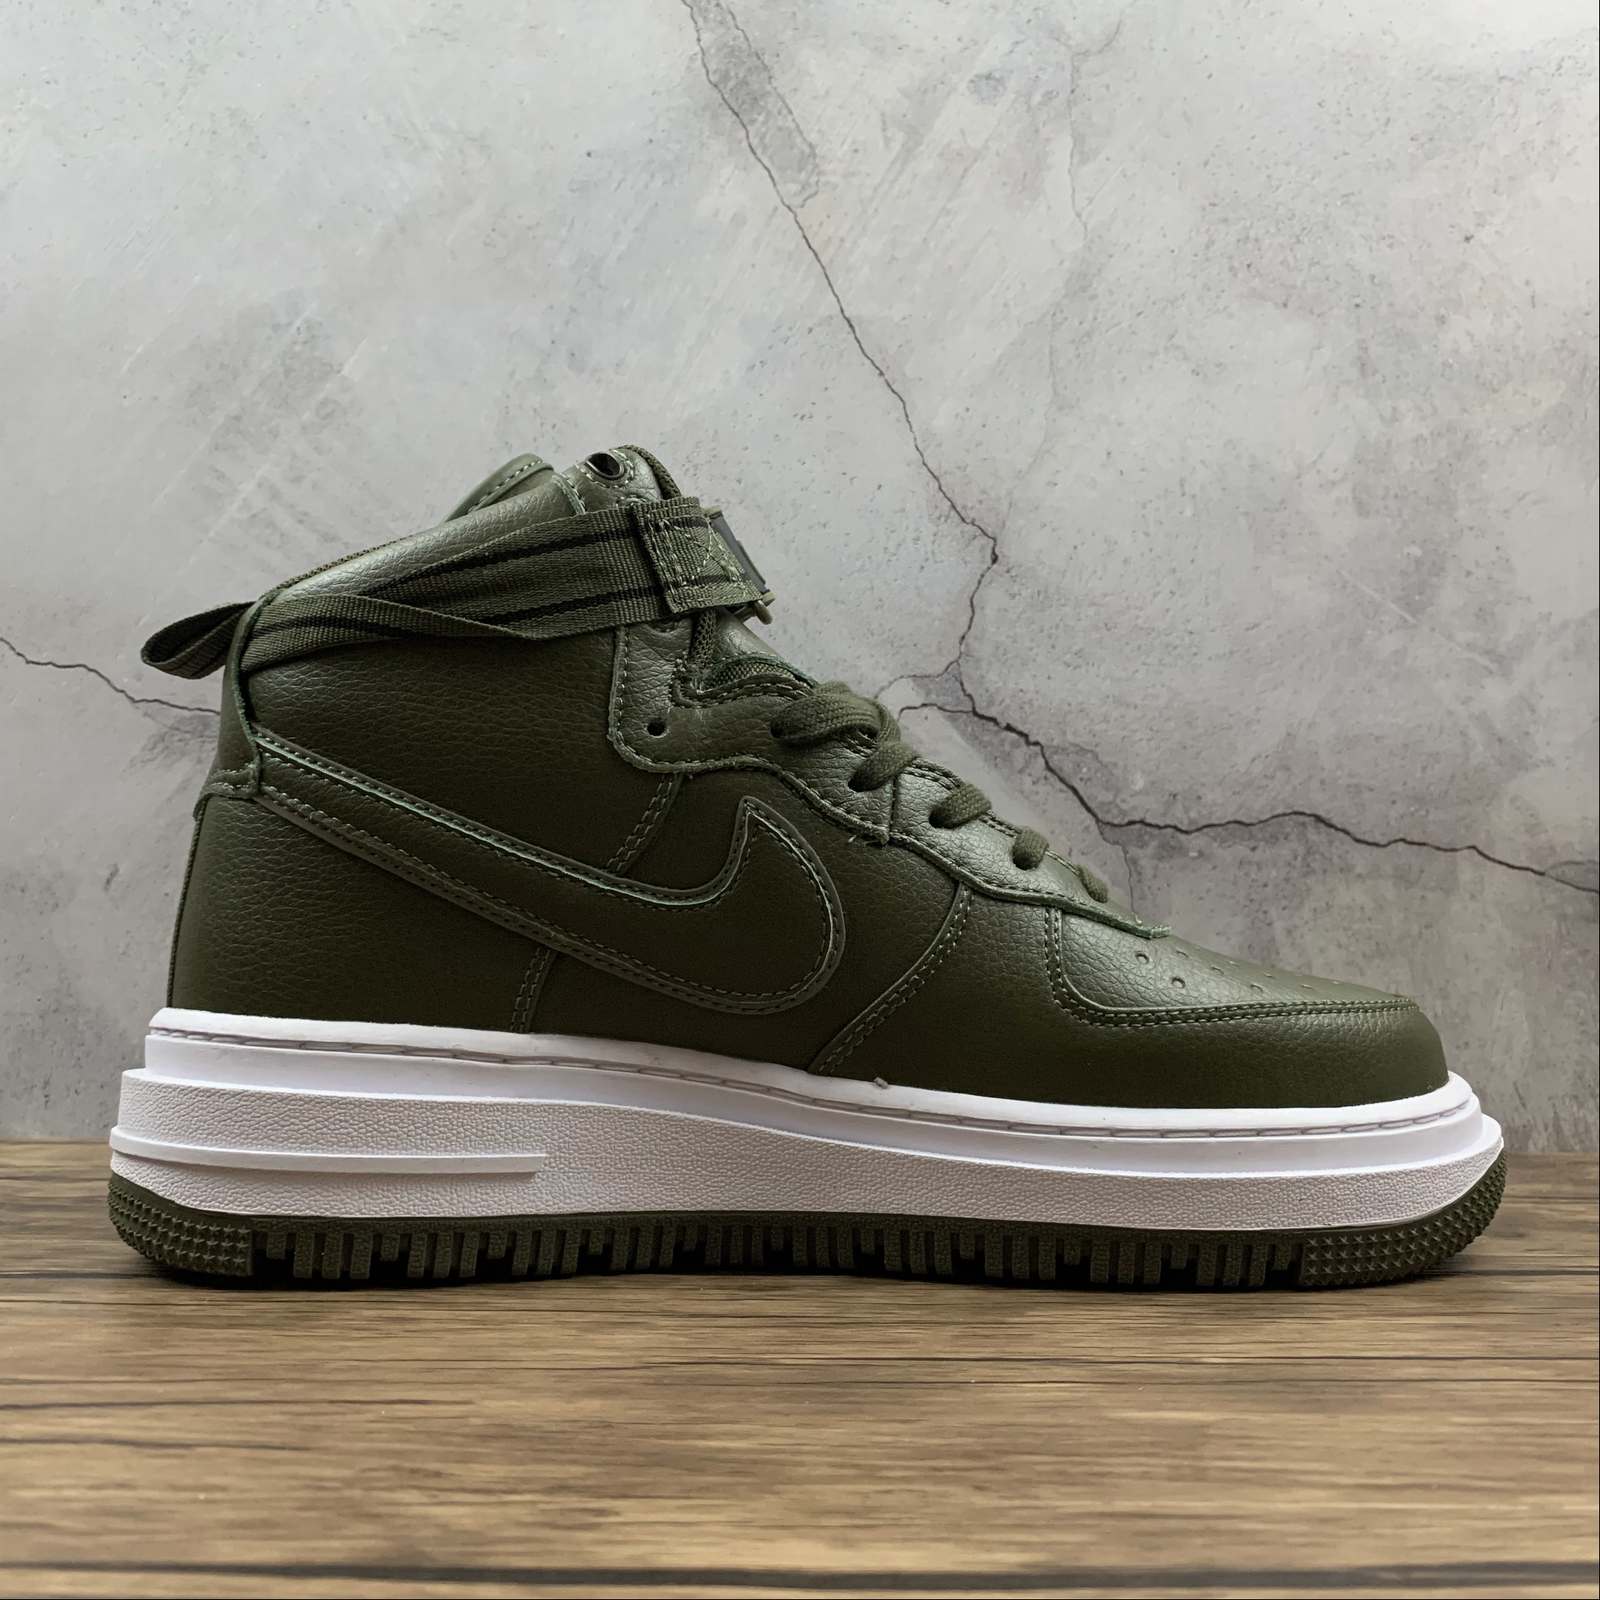 Nike Air Force 1 Gore-Tex Boot “Medium Olive” For Sale – The Sole Line